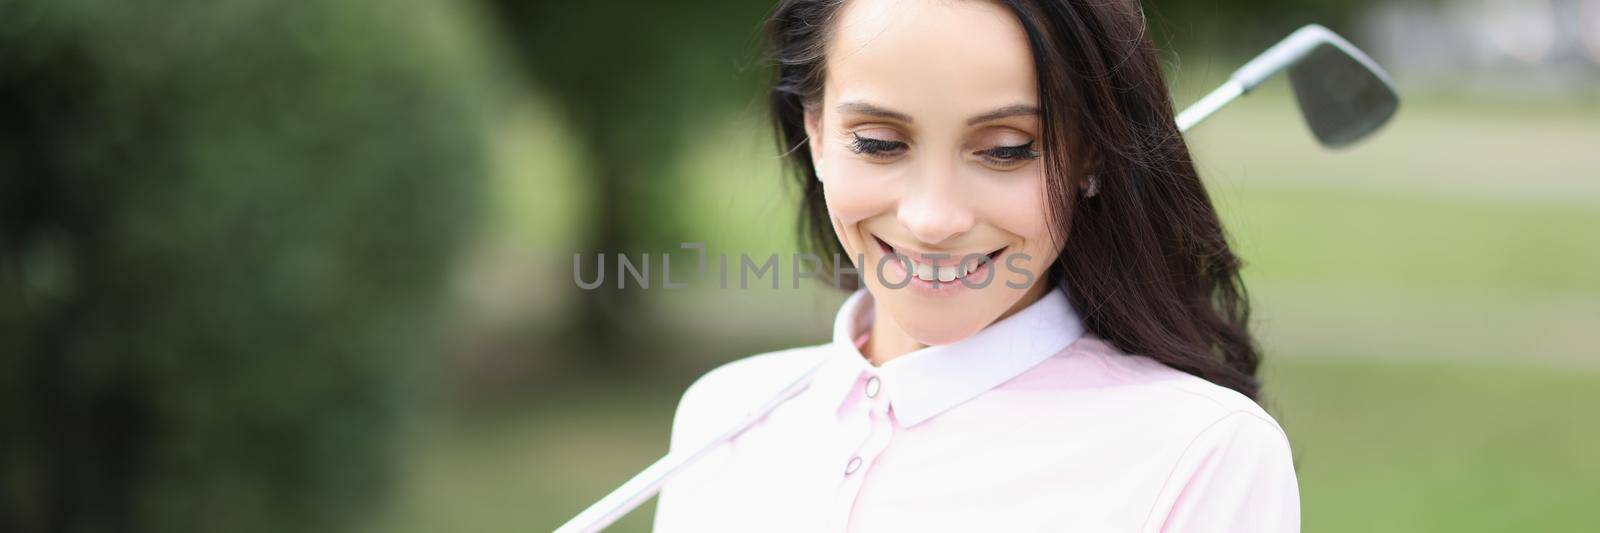 Portrait of smiling professional golf player woman hold ball on palm. Energetic female ready to play active game on field. Golf, sport, champion concept